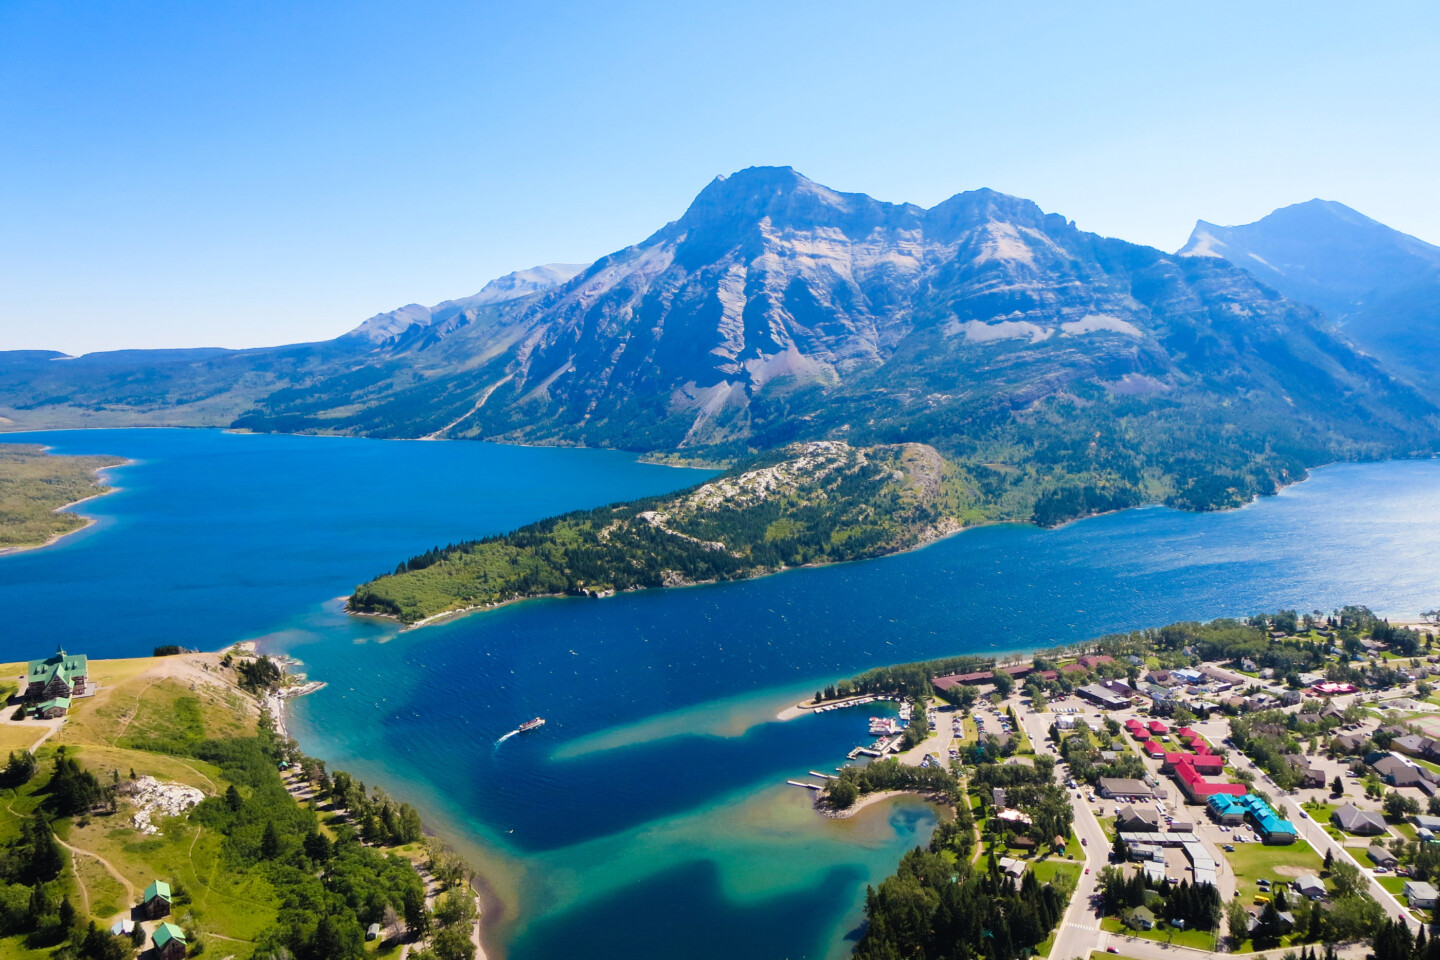 View of the lakes and mountains around Waterton